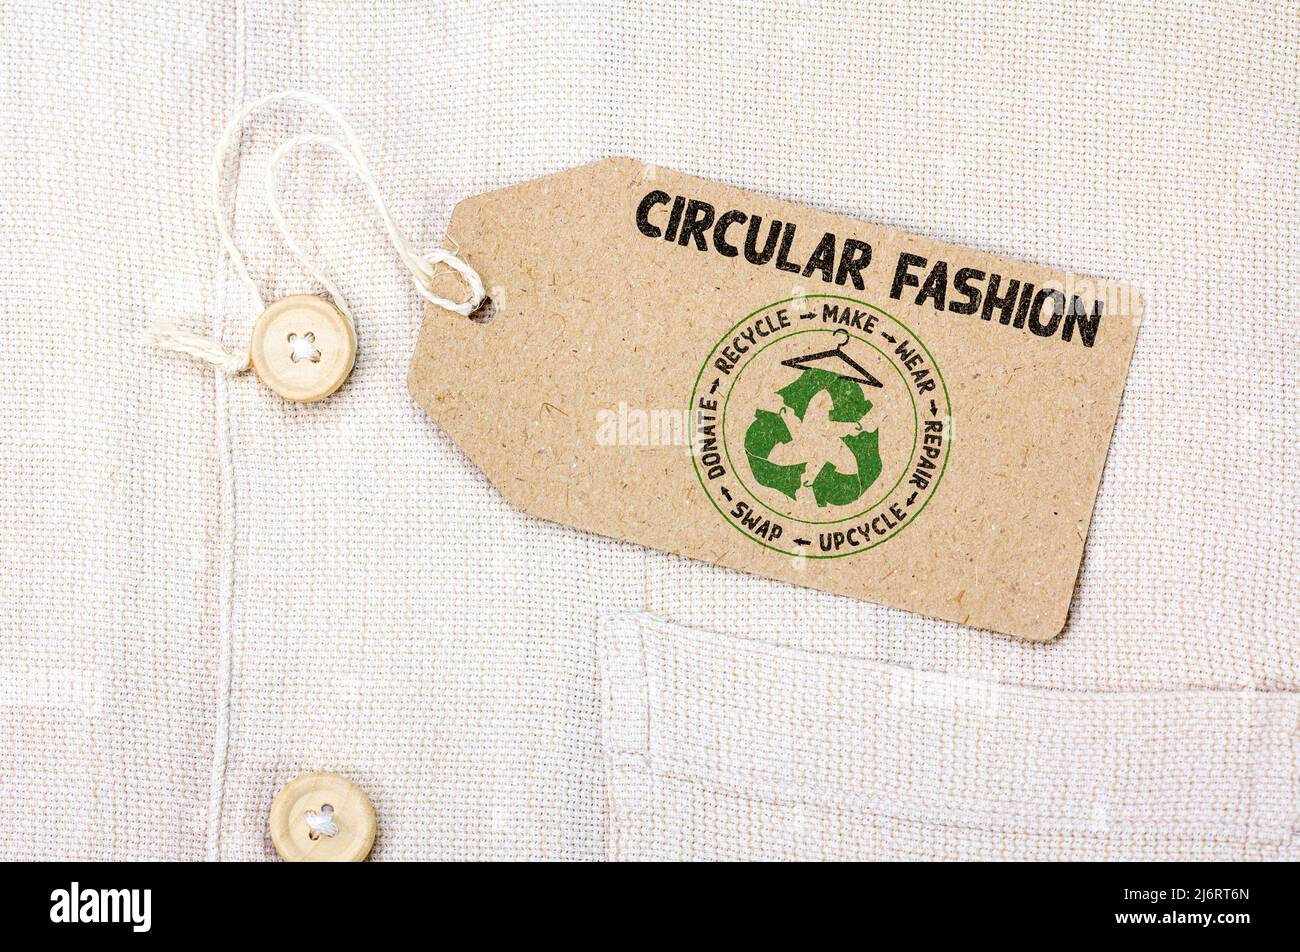 Circular Fashion Label auf Pullover, , machen, tragen, reparieren, Upcycle, Swap, donate, recycle with eco clothes recycle Icon nachhaltiges Modekonzept Stockfoto